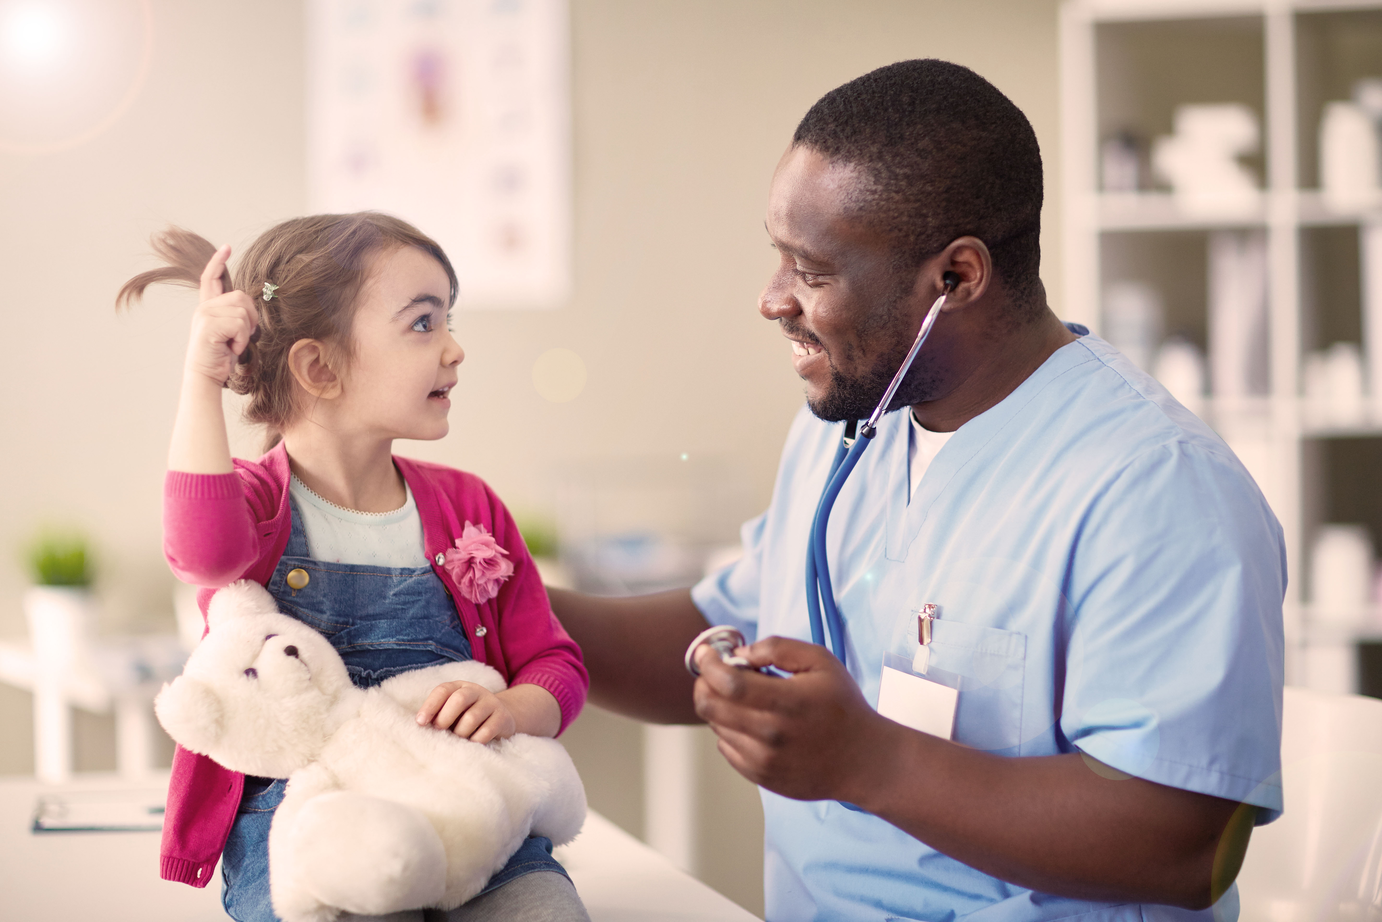 Little girl holding a teddy bear and telling her doctor a story